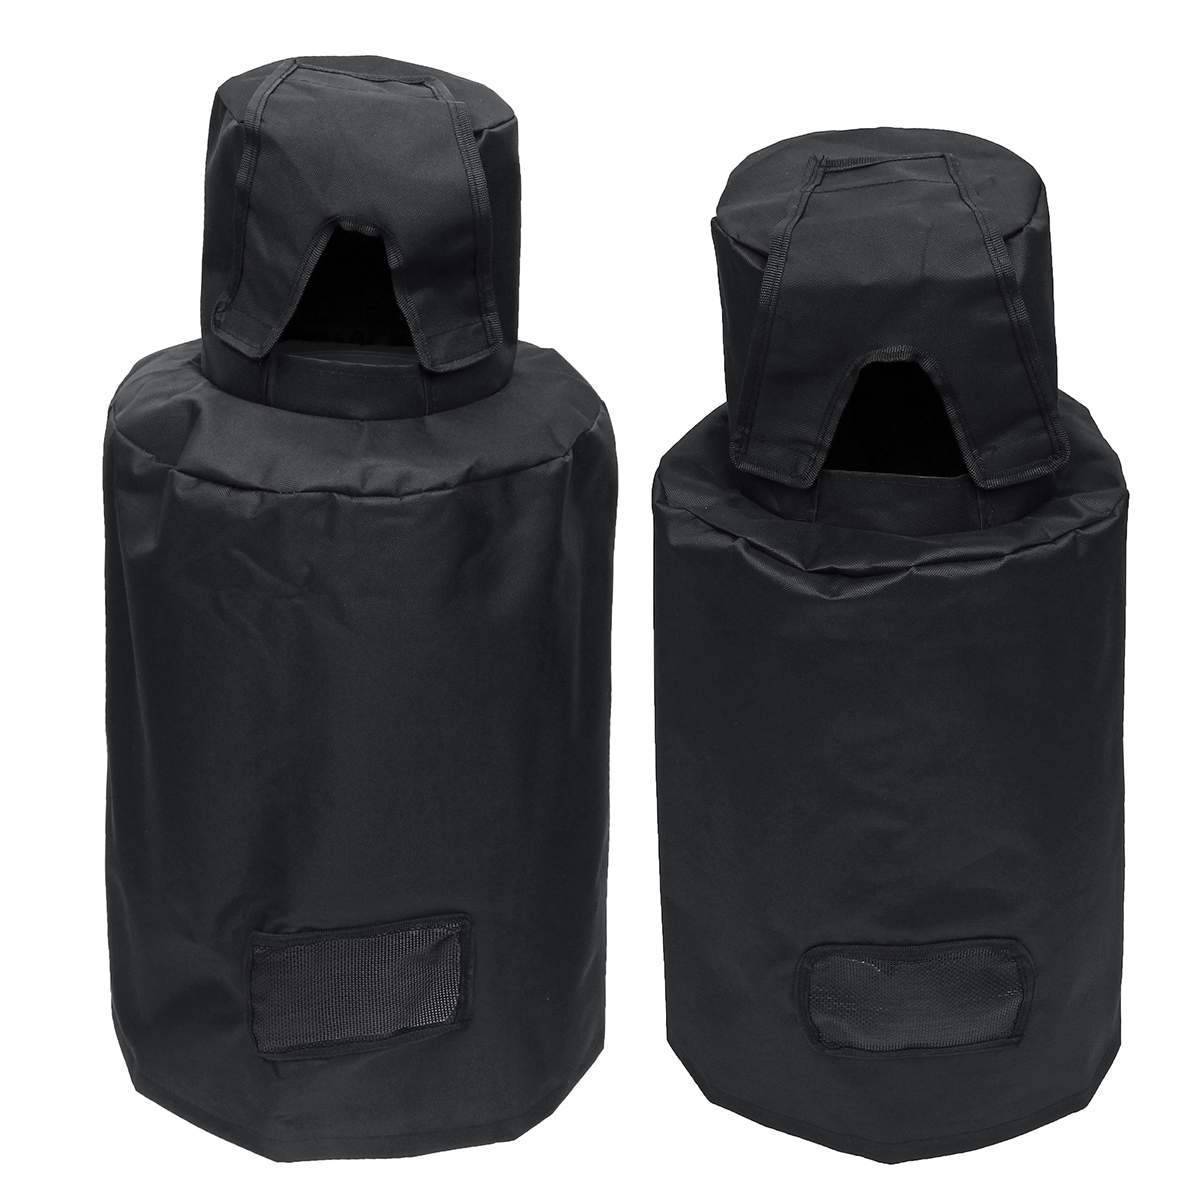 Survival Gears Depot All-Purpose Covers Camping Propane Tank Cover